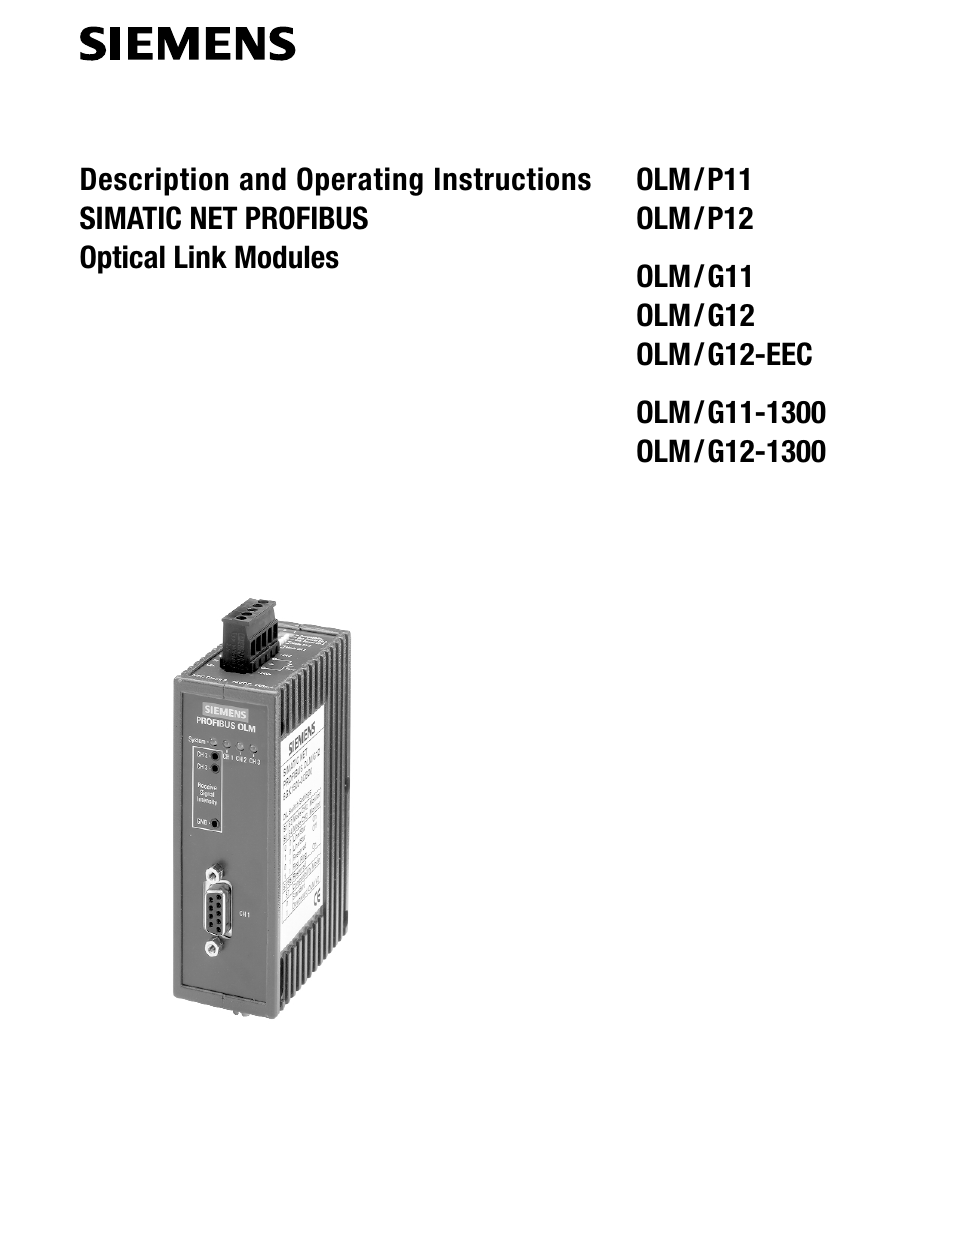 Olm (optical link modules) | Siemens SIMATIC NET PROFIBUS User Manual |  Page 397 / 490